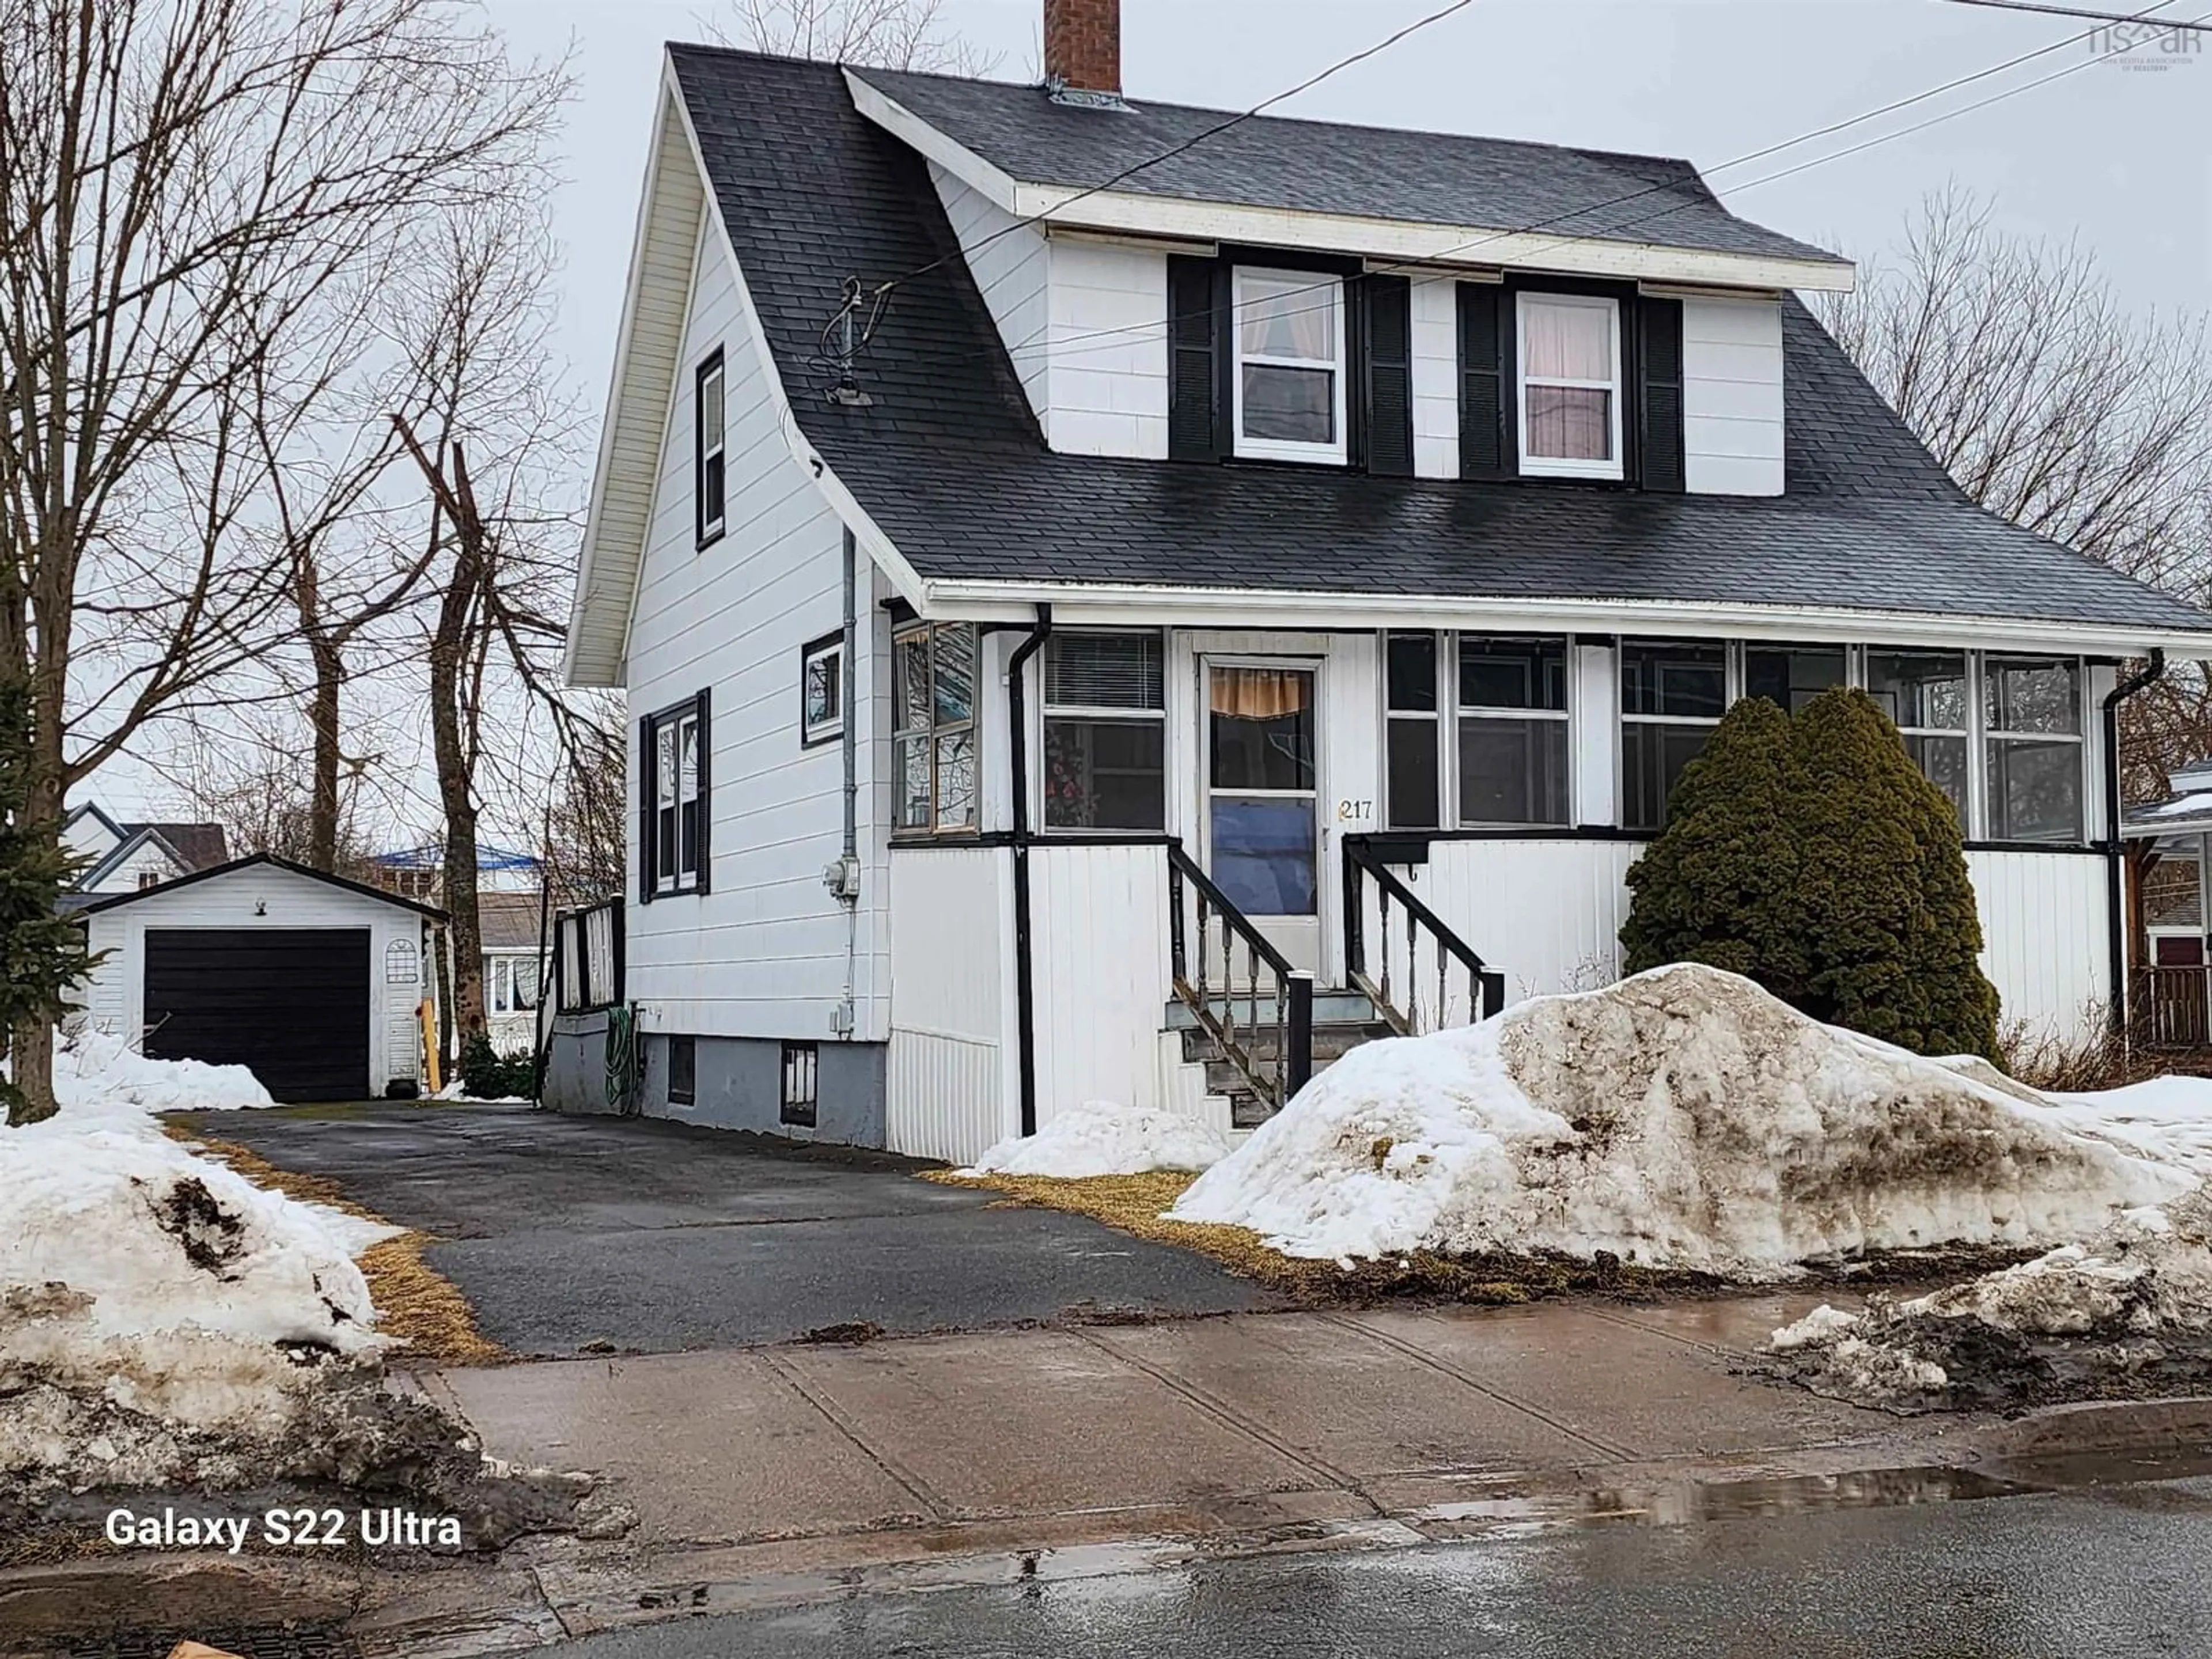 Home with unknown exterior material for 217 Brunswick St, Truro Nova Scotia B2N 2H9